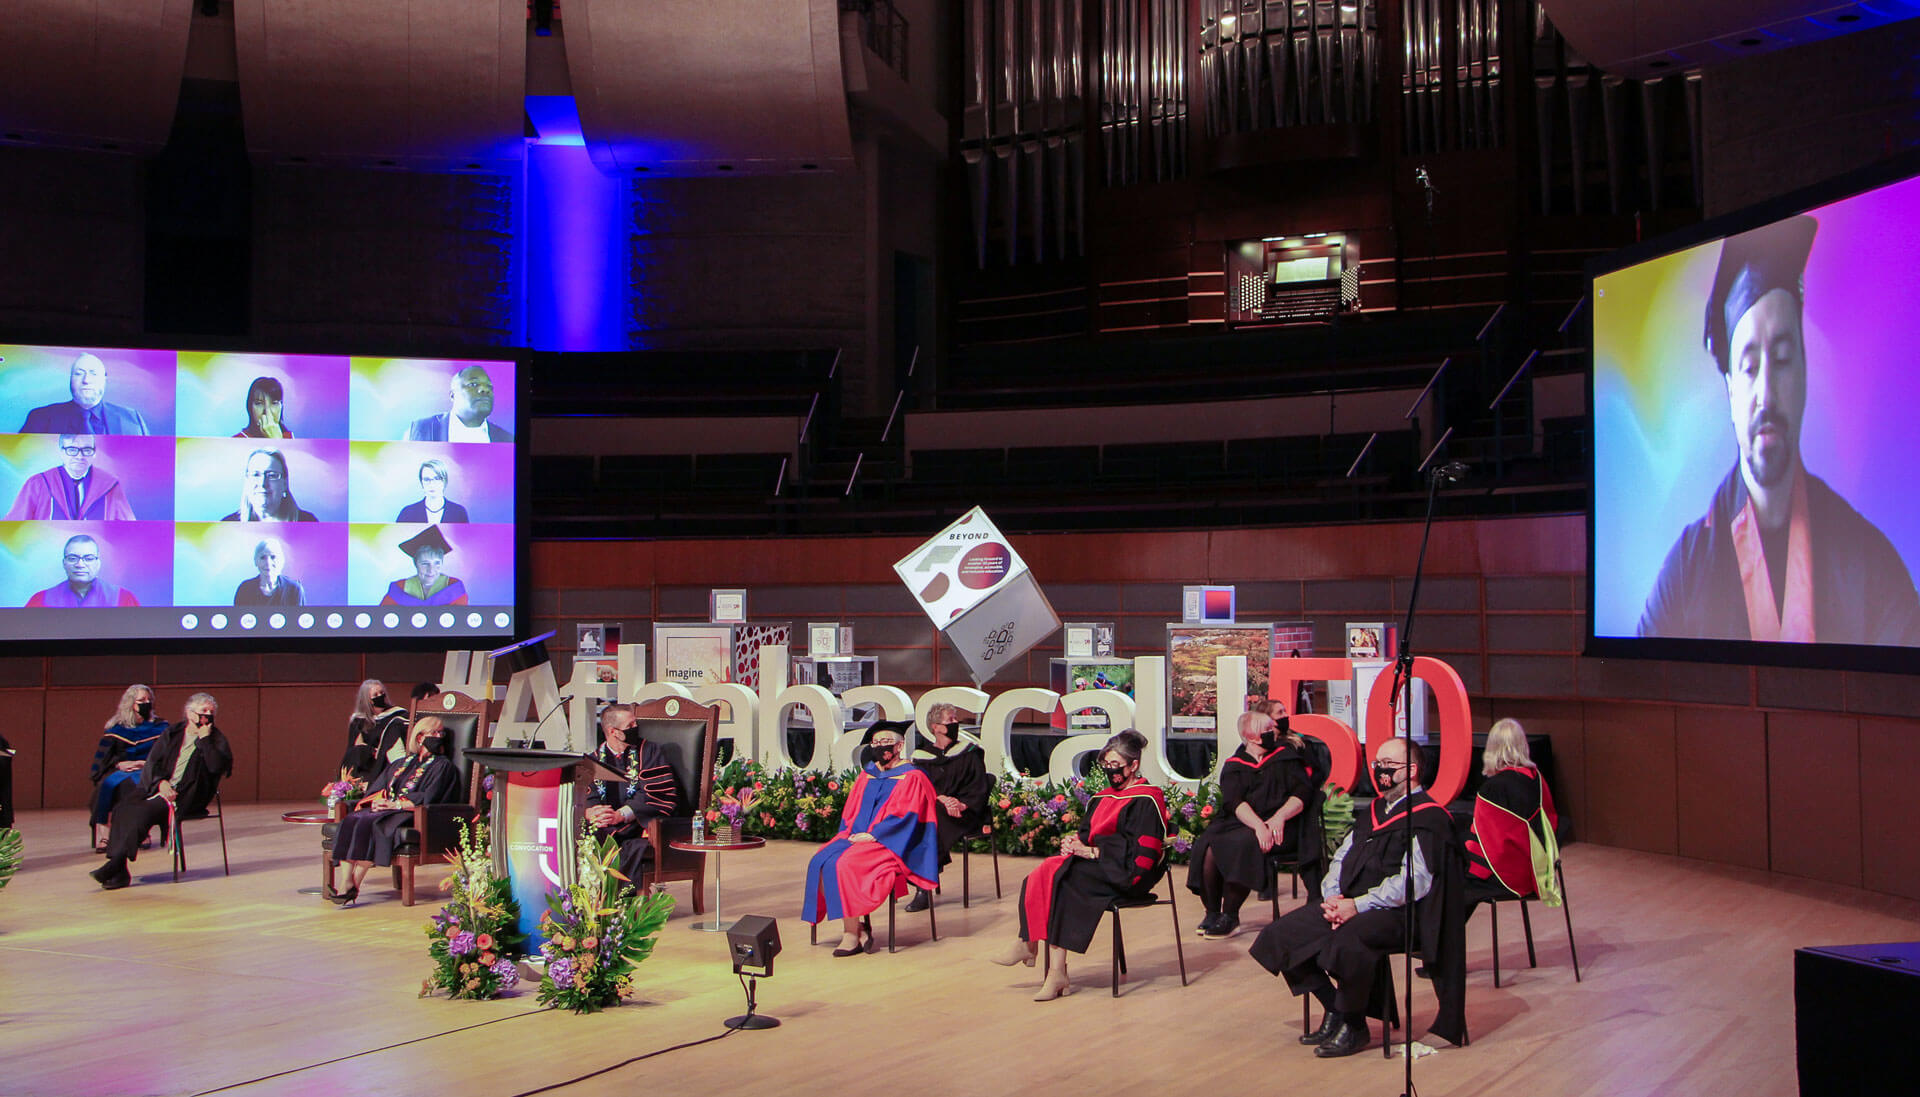 This photo shows the platform party—wearing masks and spaced 2 metres apart—on stage at a recording of the convocation ceremony that was later broadcasted to the graduates.